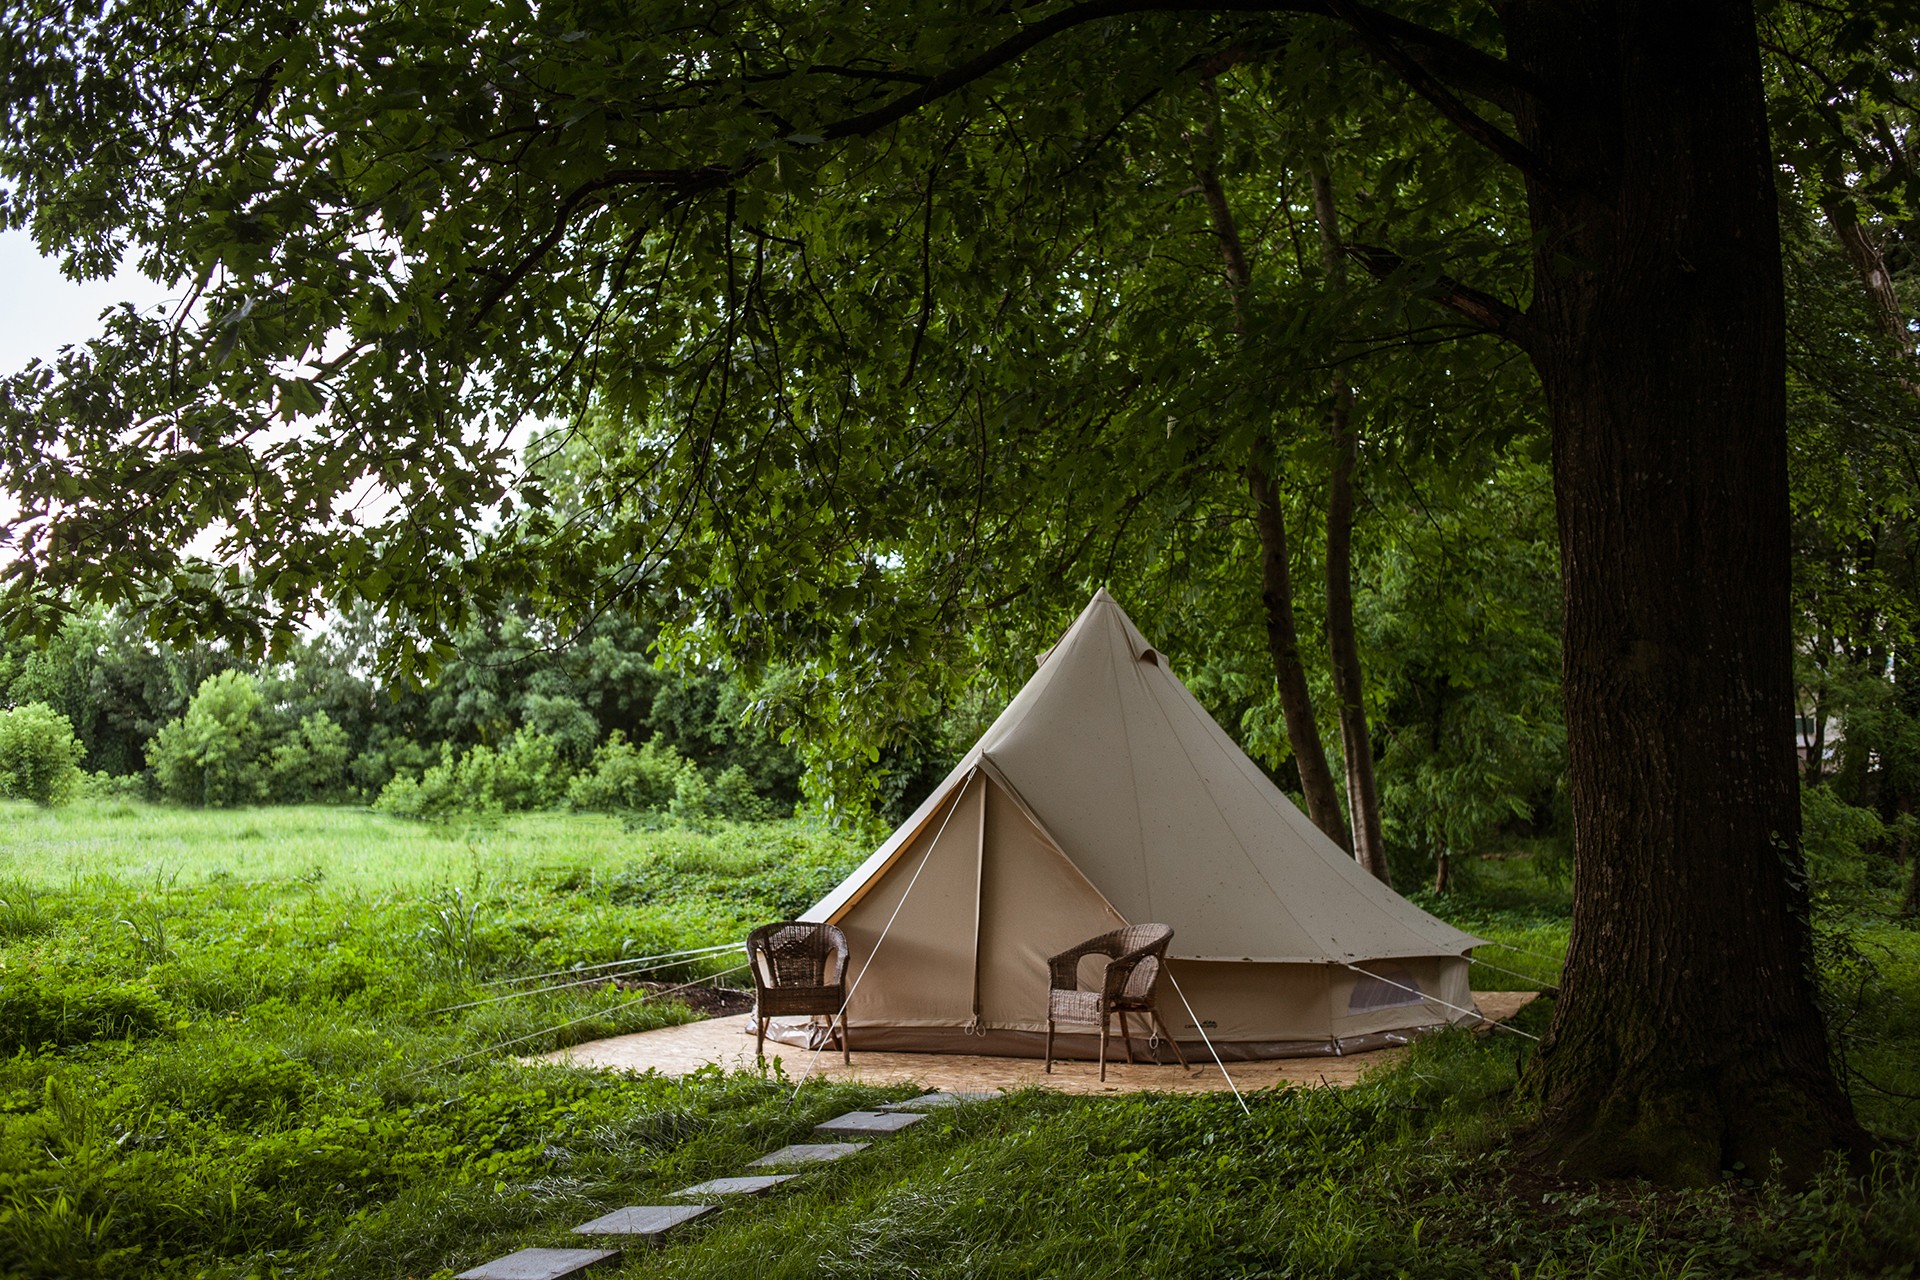 Luxury tents for your next camping holidays – these are things you